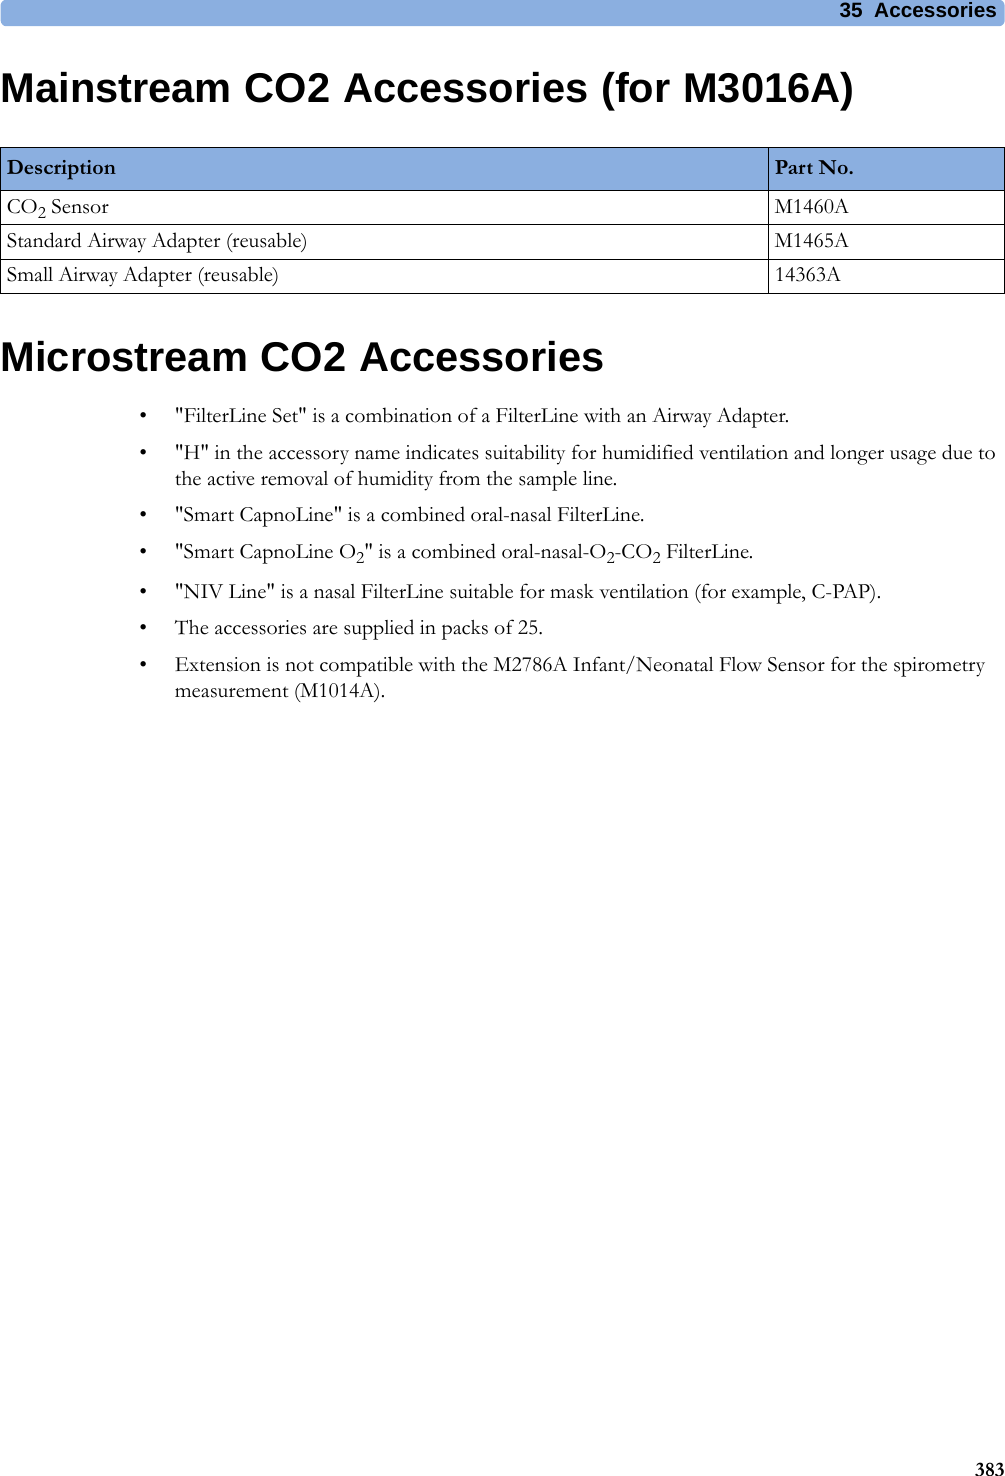 35 Accessories383Mainstream CO2 Accessories (for M3016A)Microstream CO2 Accessories• &quot;FilterLine Set&quot; is a combination of a FilterLine with an Airway Adapter.• &quot;H&quot; in the accessory name indicates suitability for humidified ventilation and longer usage due to the active removal of humidity from the sample line.• &quot;Smart CapnoLine&quot; is a combined oral-nasal FilterLine.• &quot;Smart CapnoLine O2&quot; is a combined oral-nasal-O2-CO2 FilterLine.• &quot;NIV Line&quot; is a nasal FilterLine suitable for mask ventilation (for example, C-PAP).• The accessories are supplied in packs of 25.• Extension is not compatible with the M2786A Infant/Neonatal Flow Sensor for the spirometry measurement (M1014A).Description Part No.CO2 Sensor M1460AStandard Airway Adapter (reusable) M1465ASmall Airway Adapter (reusable) 14363A